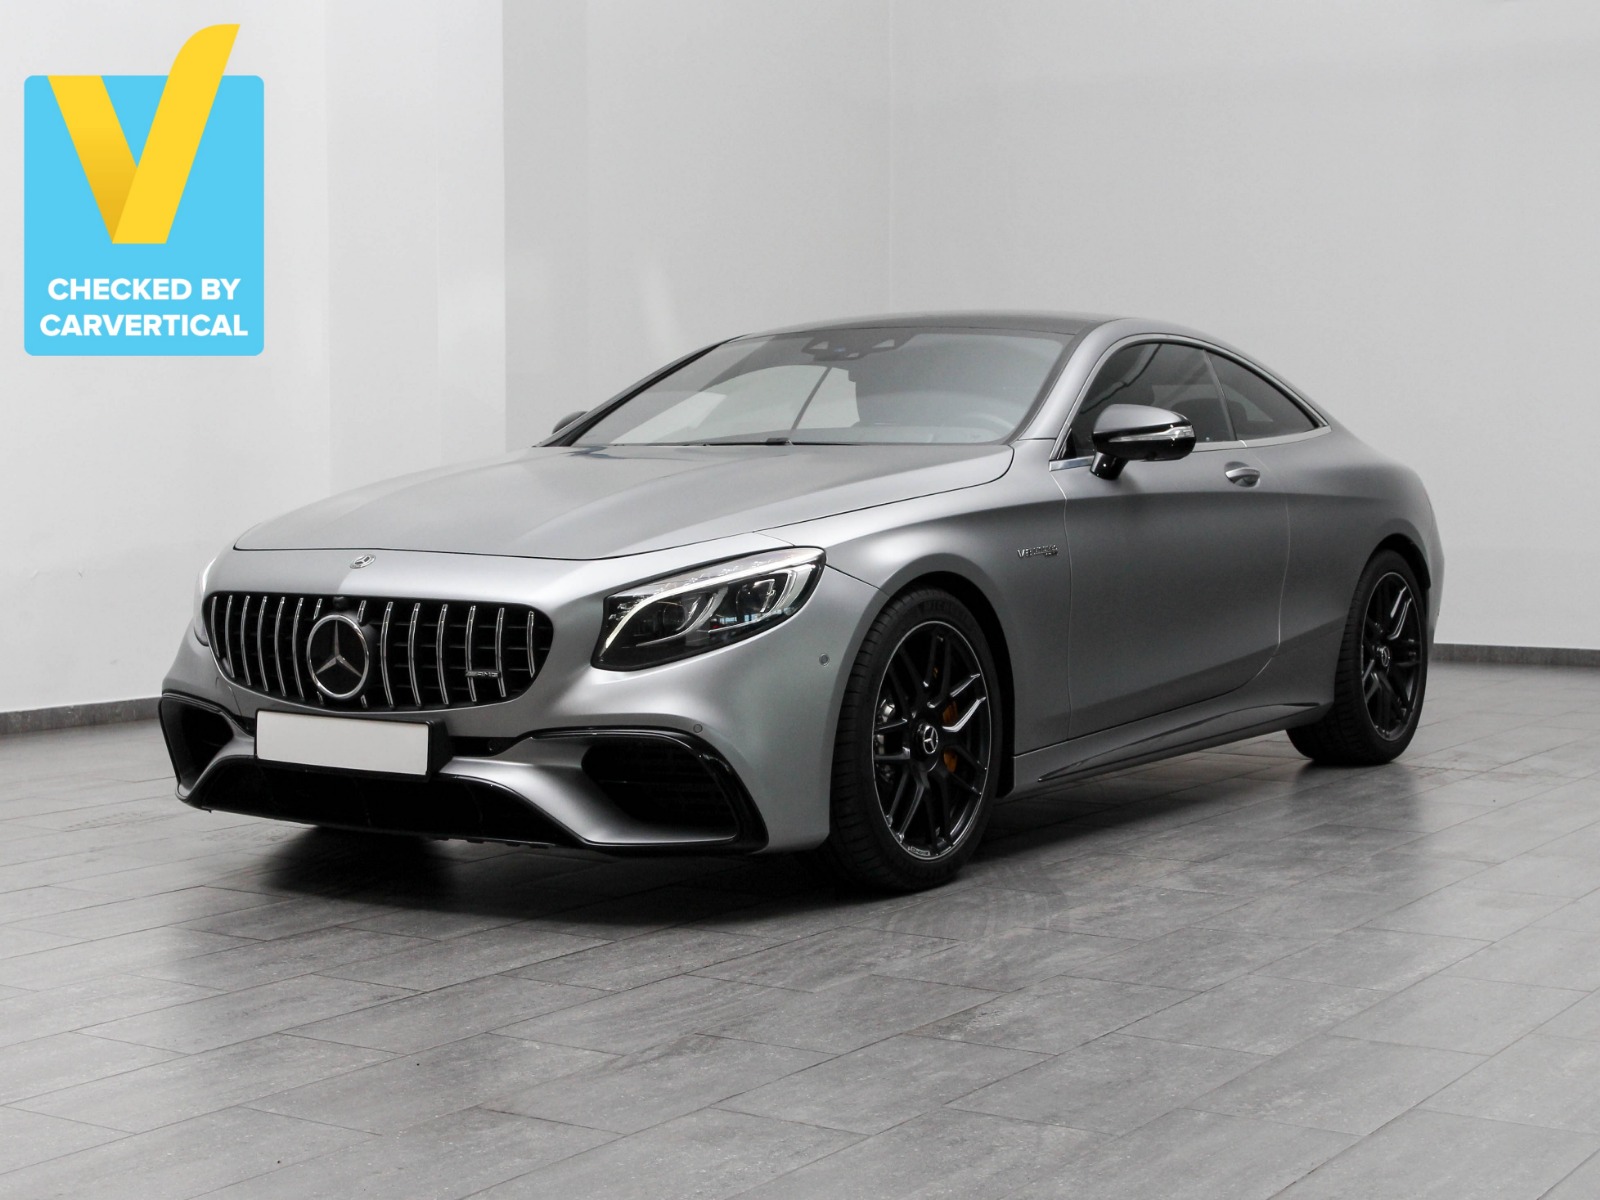 Mercedes-Benz S63 AMG 4MATIC+ Coupe